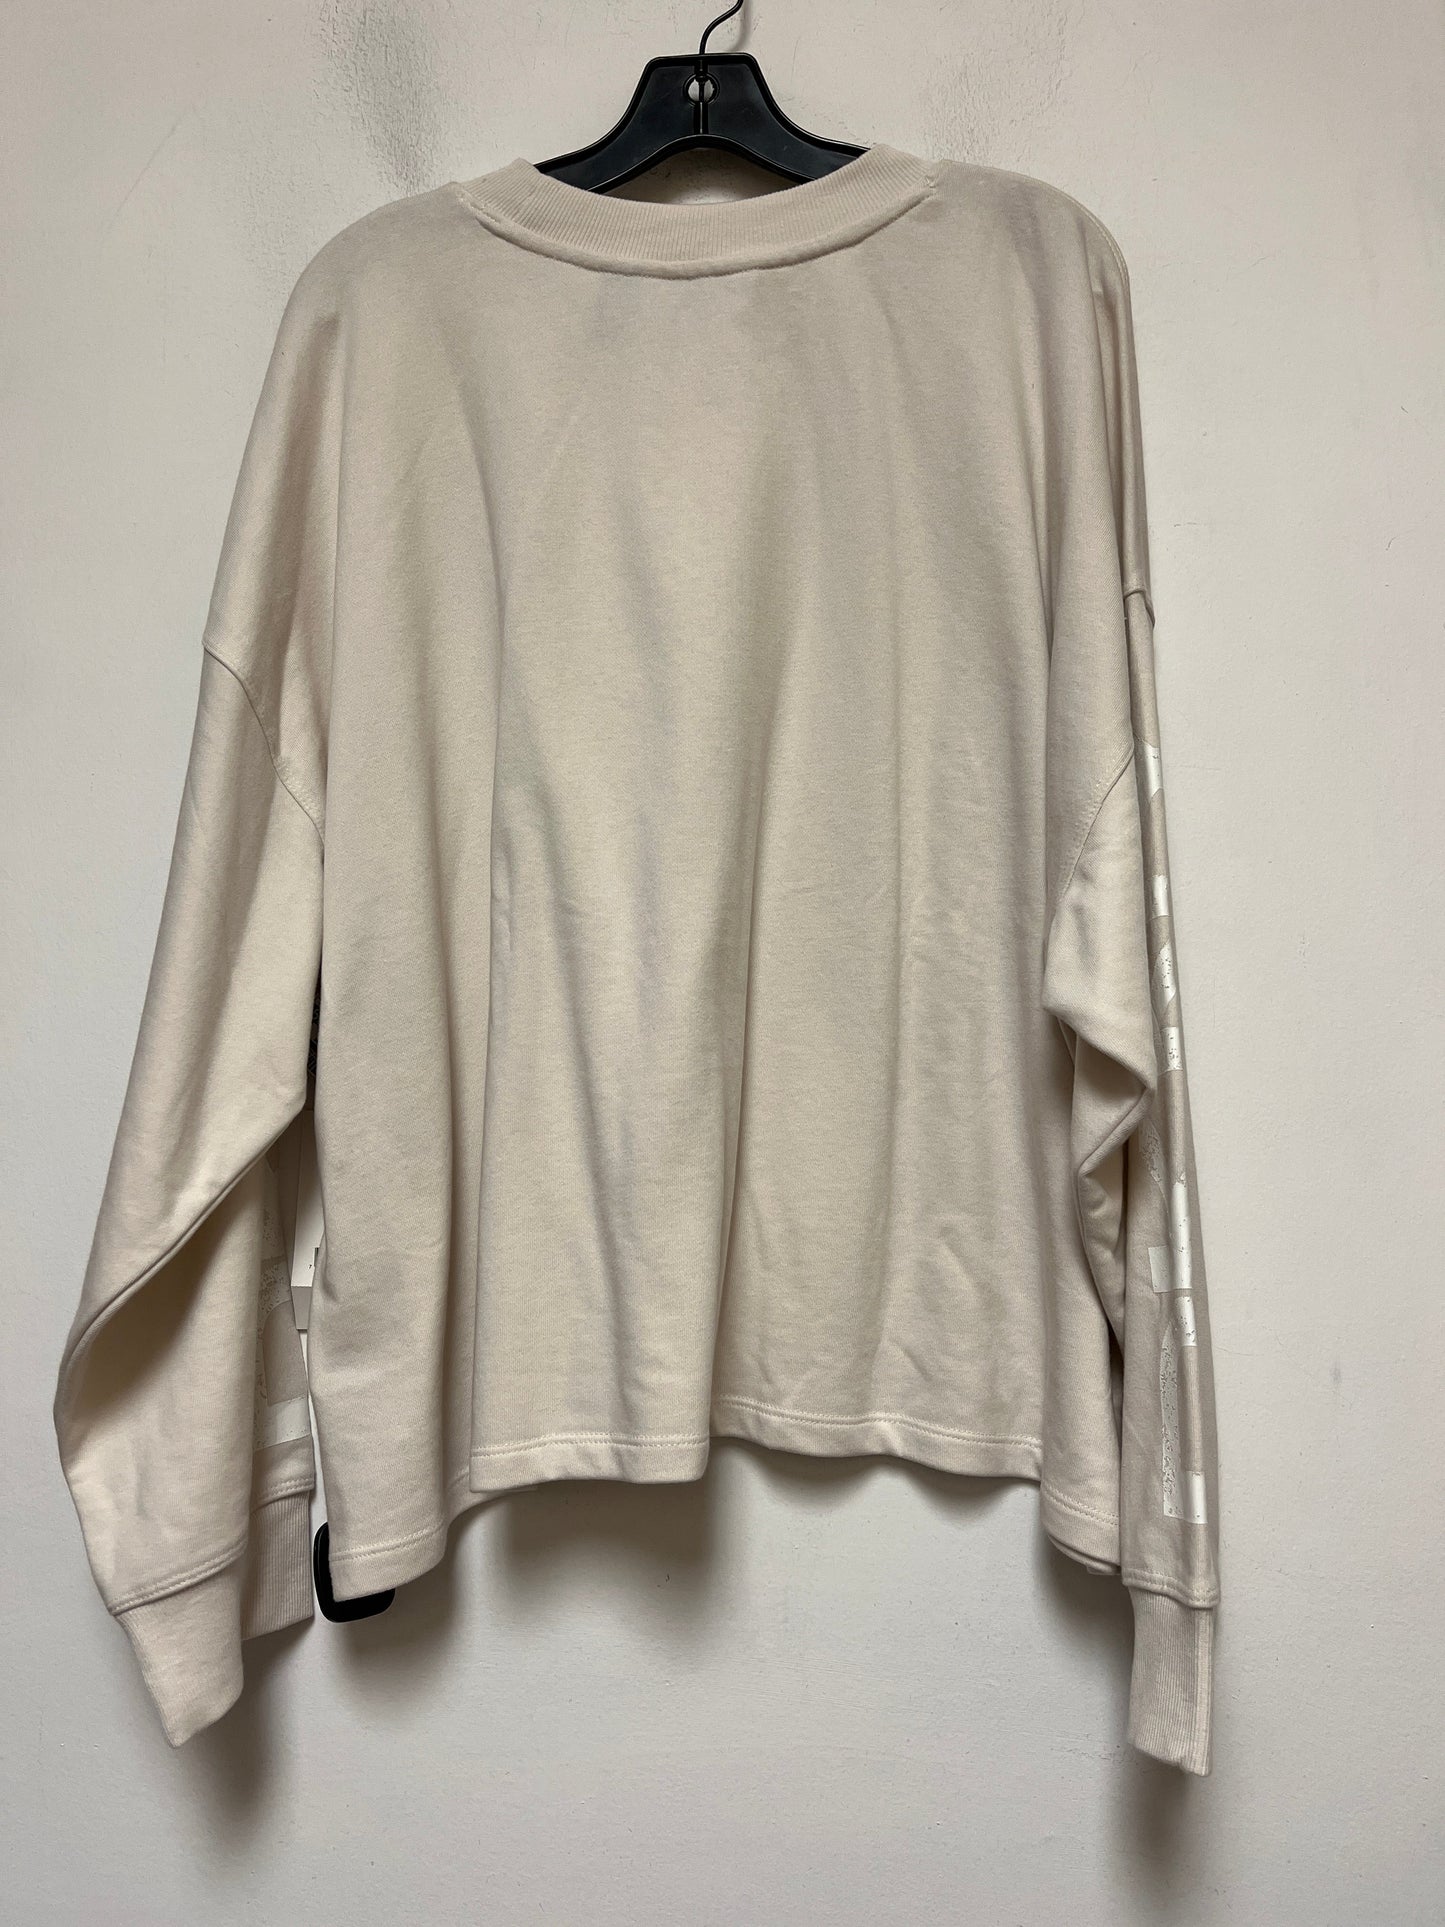 Athletic Top Long Sleeve Collar By Dkny  Size: 3x